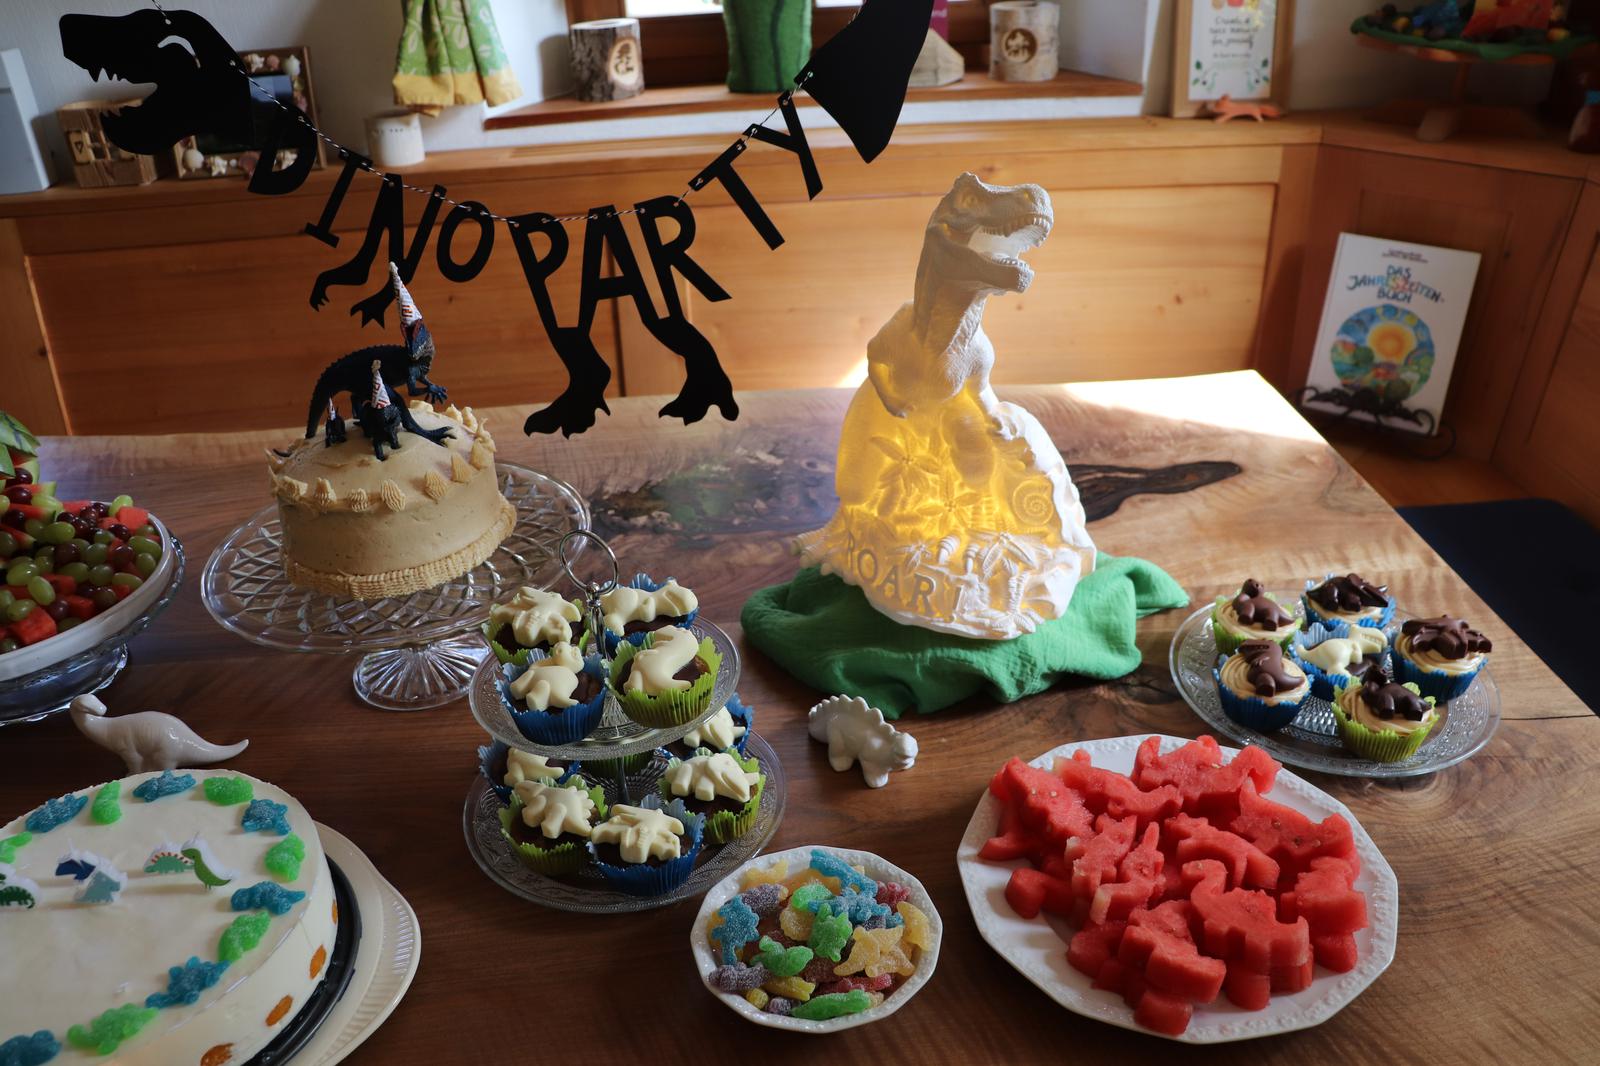 Dinoparty|Dinosaurierparty|Dino-Kindergeburtstag|Dinosauriergeburtstag|Kindergeburtstag|Dinosaurier|Dinos|Kinderfest|Kindergeburtstage feiern